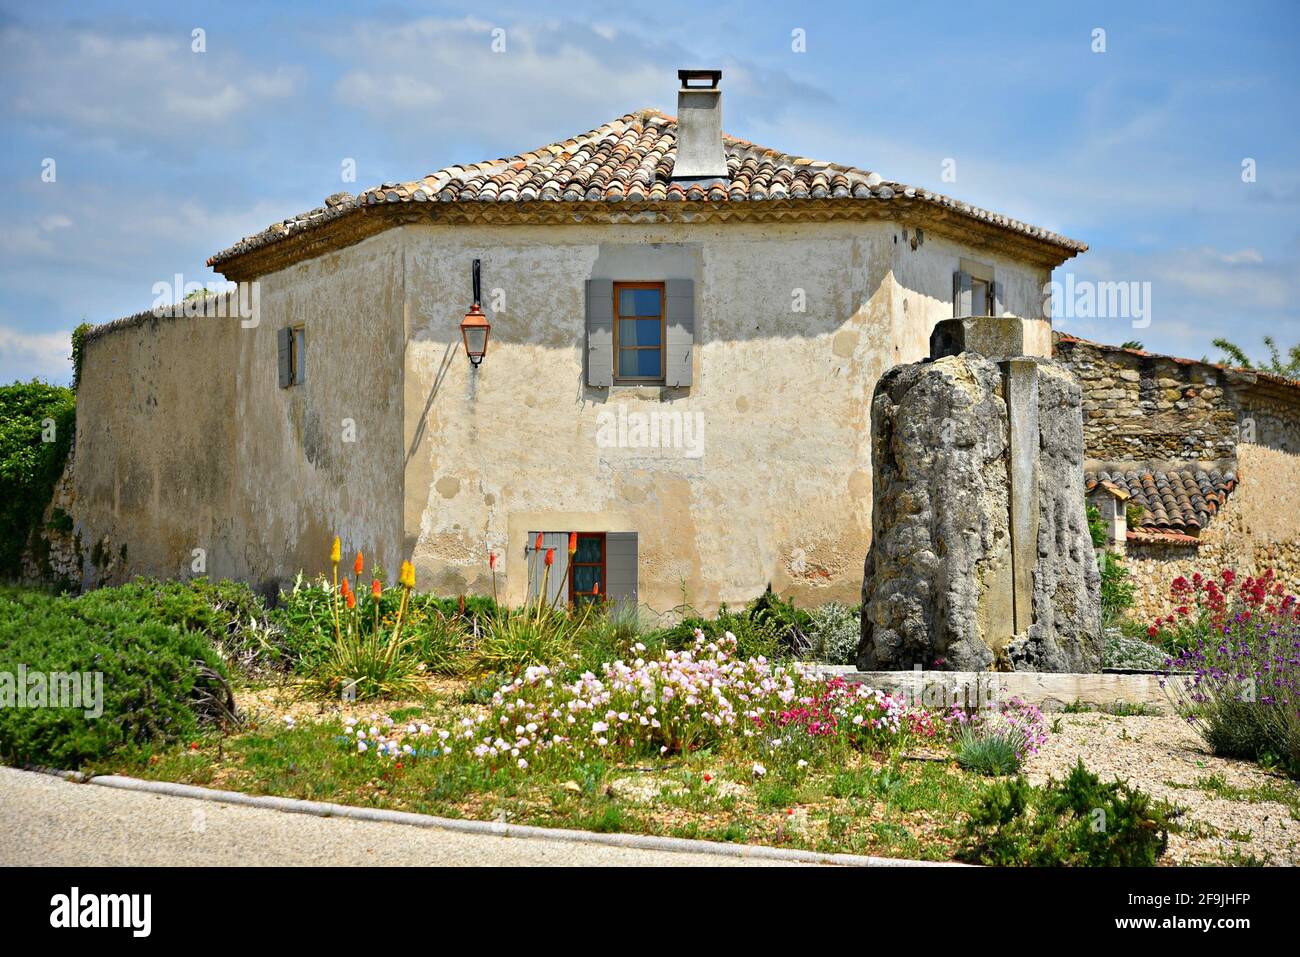 Typical Provençal style rural house with a clay tile rooftop in the picturesque village of Lourmarin in Vaucluse, Provence France. Stock Photo